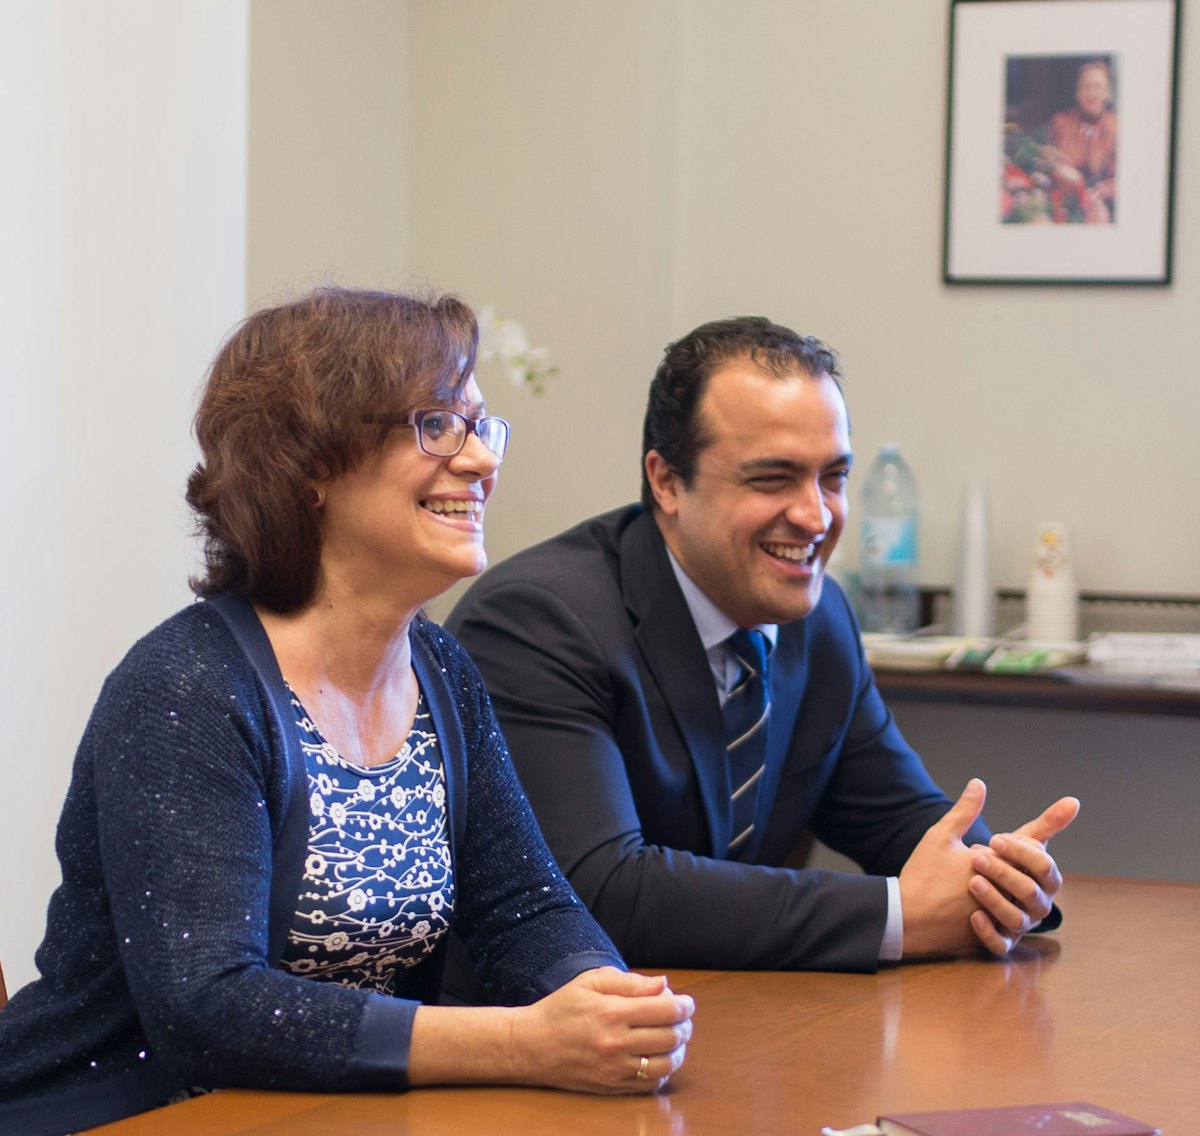 Zoraida Garcia Garro (left) and Saba Mazza, members of the Continental Board of Counsellors in Europe, laugh during their conversation with fellow Counsellors.